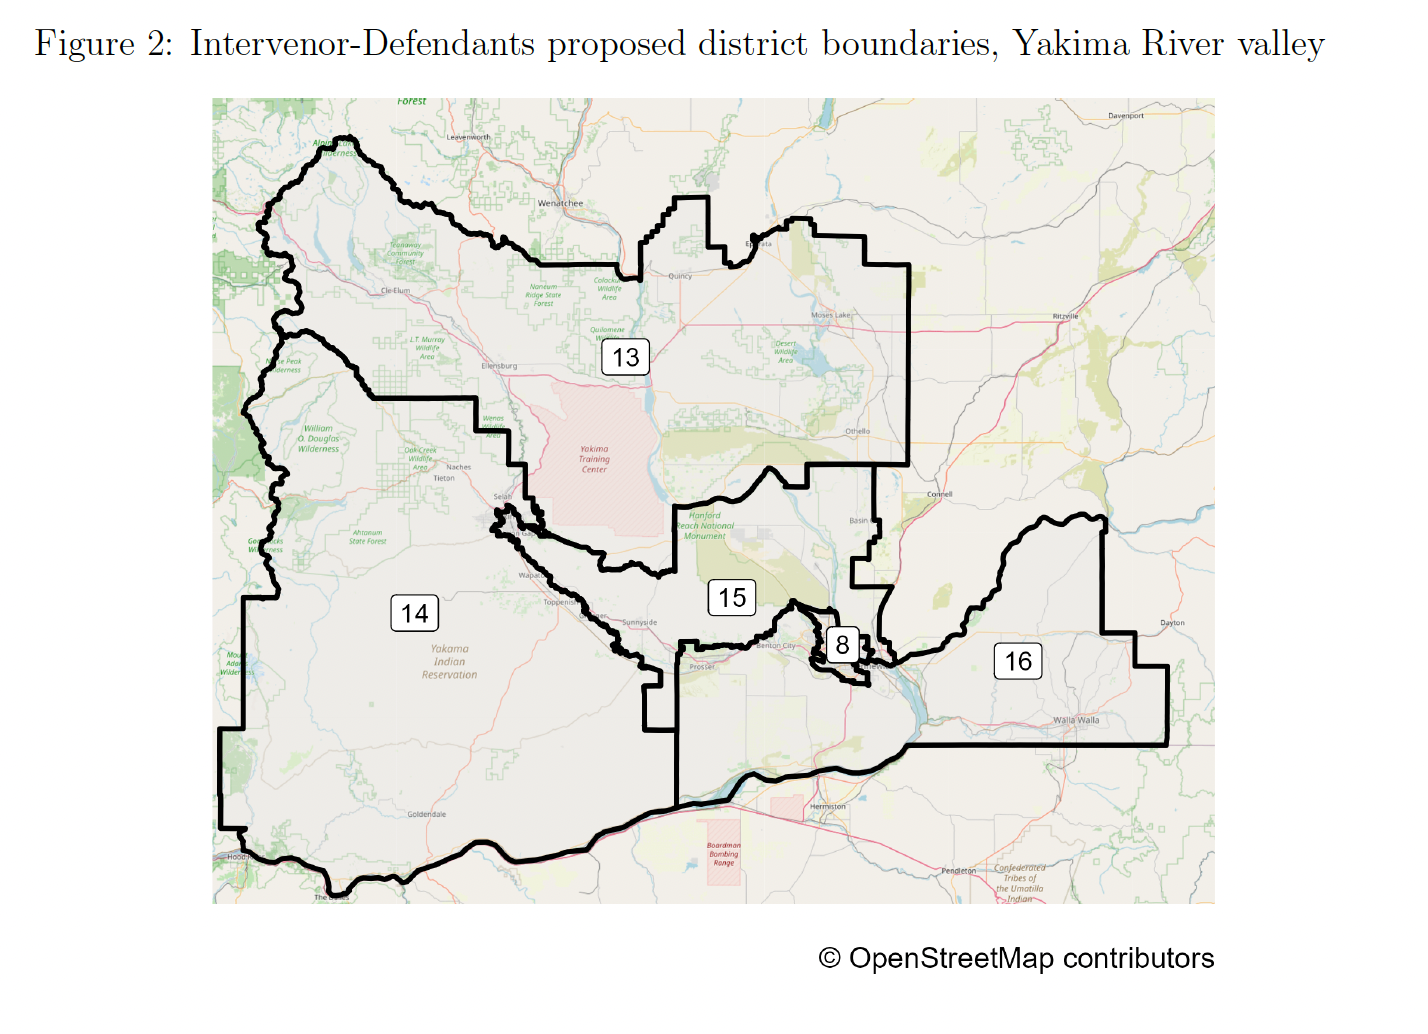 In this court document, intervenors propose district boundaries in the Yakima Valley 